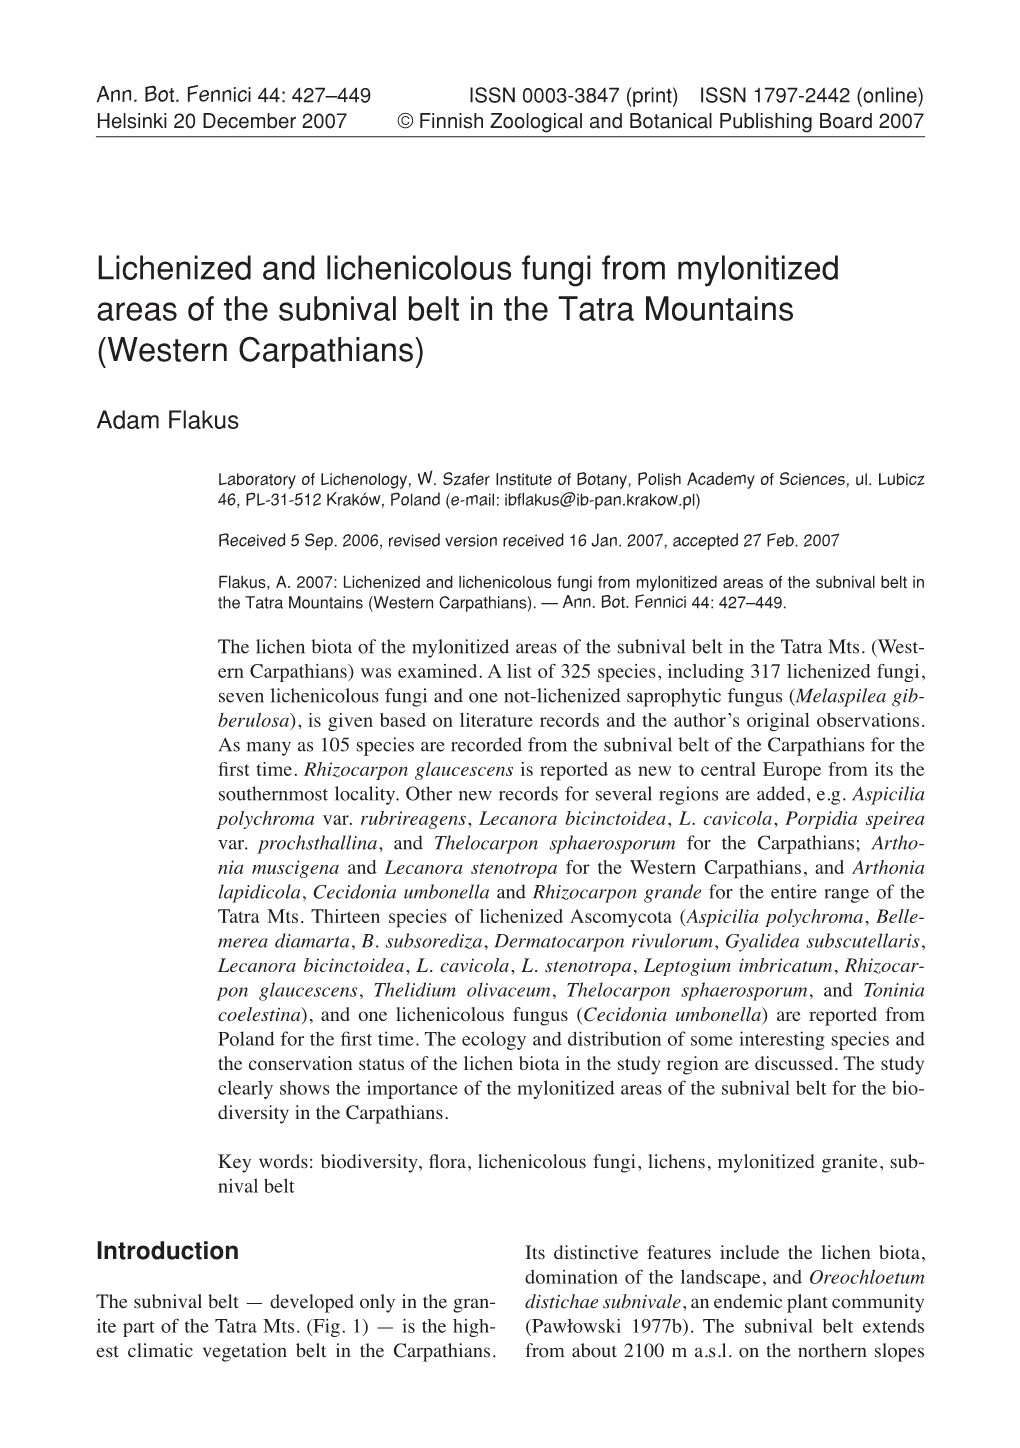 Lichenized and Lichenicolous Fungi from Mylonitized Areas of the Subnival Belt in the Tatra Mountains (Western Carpathians)